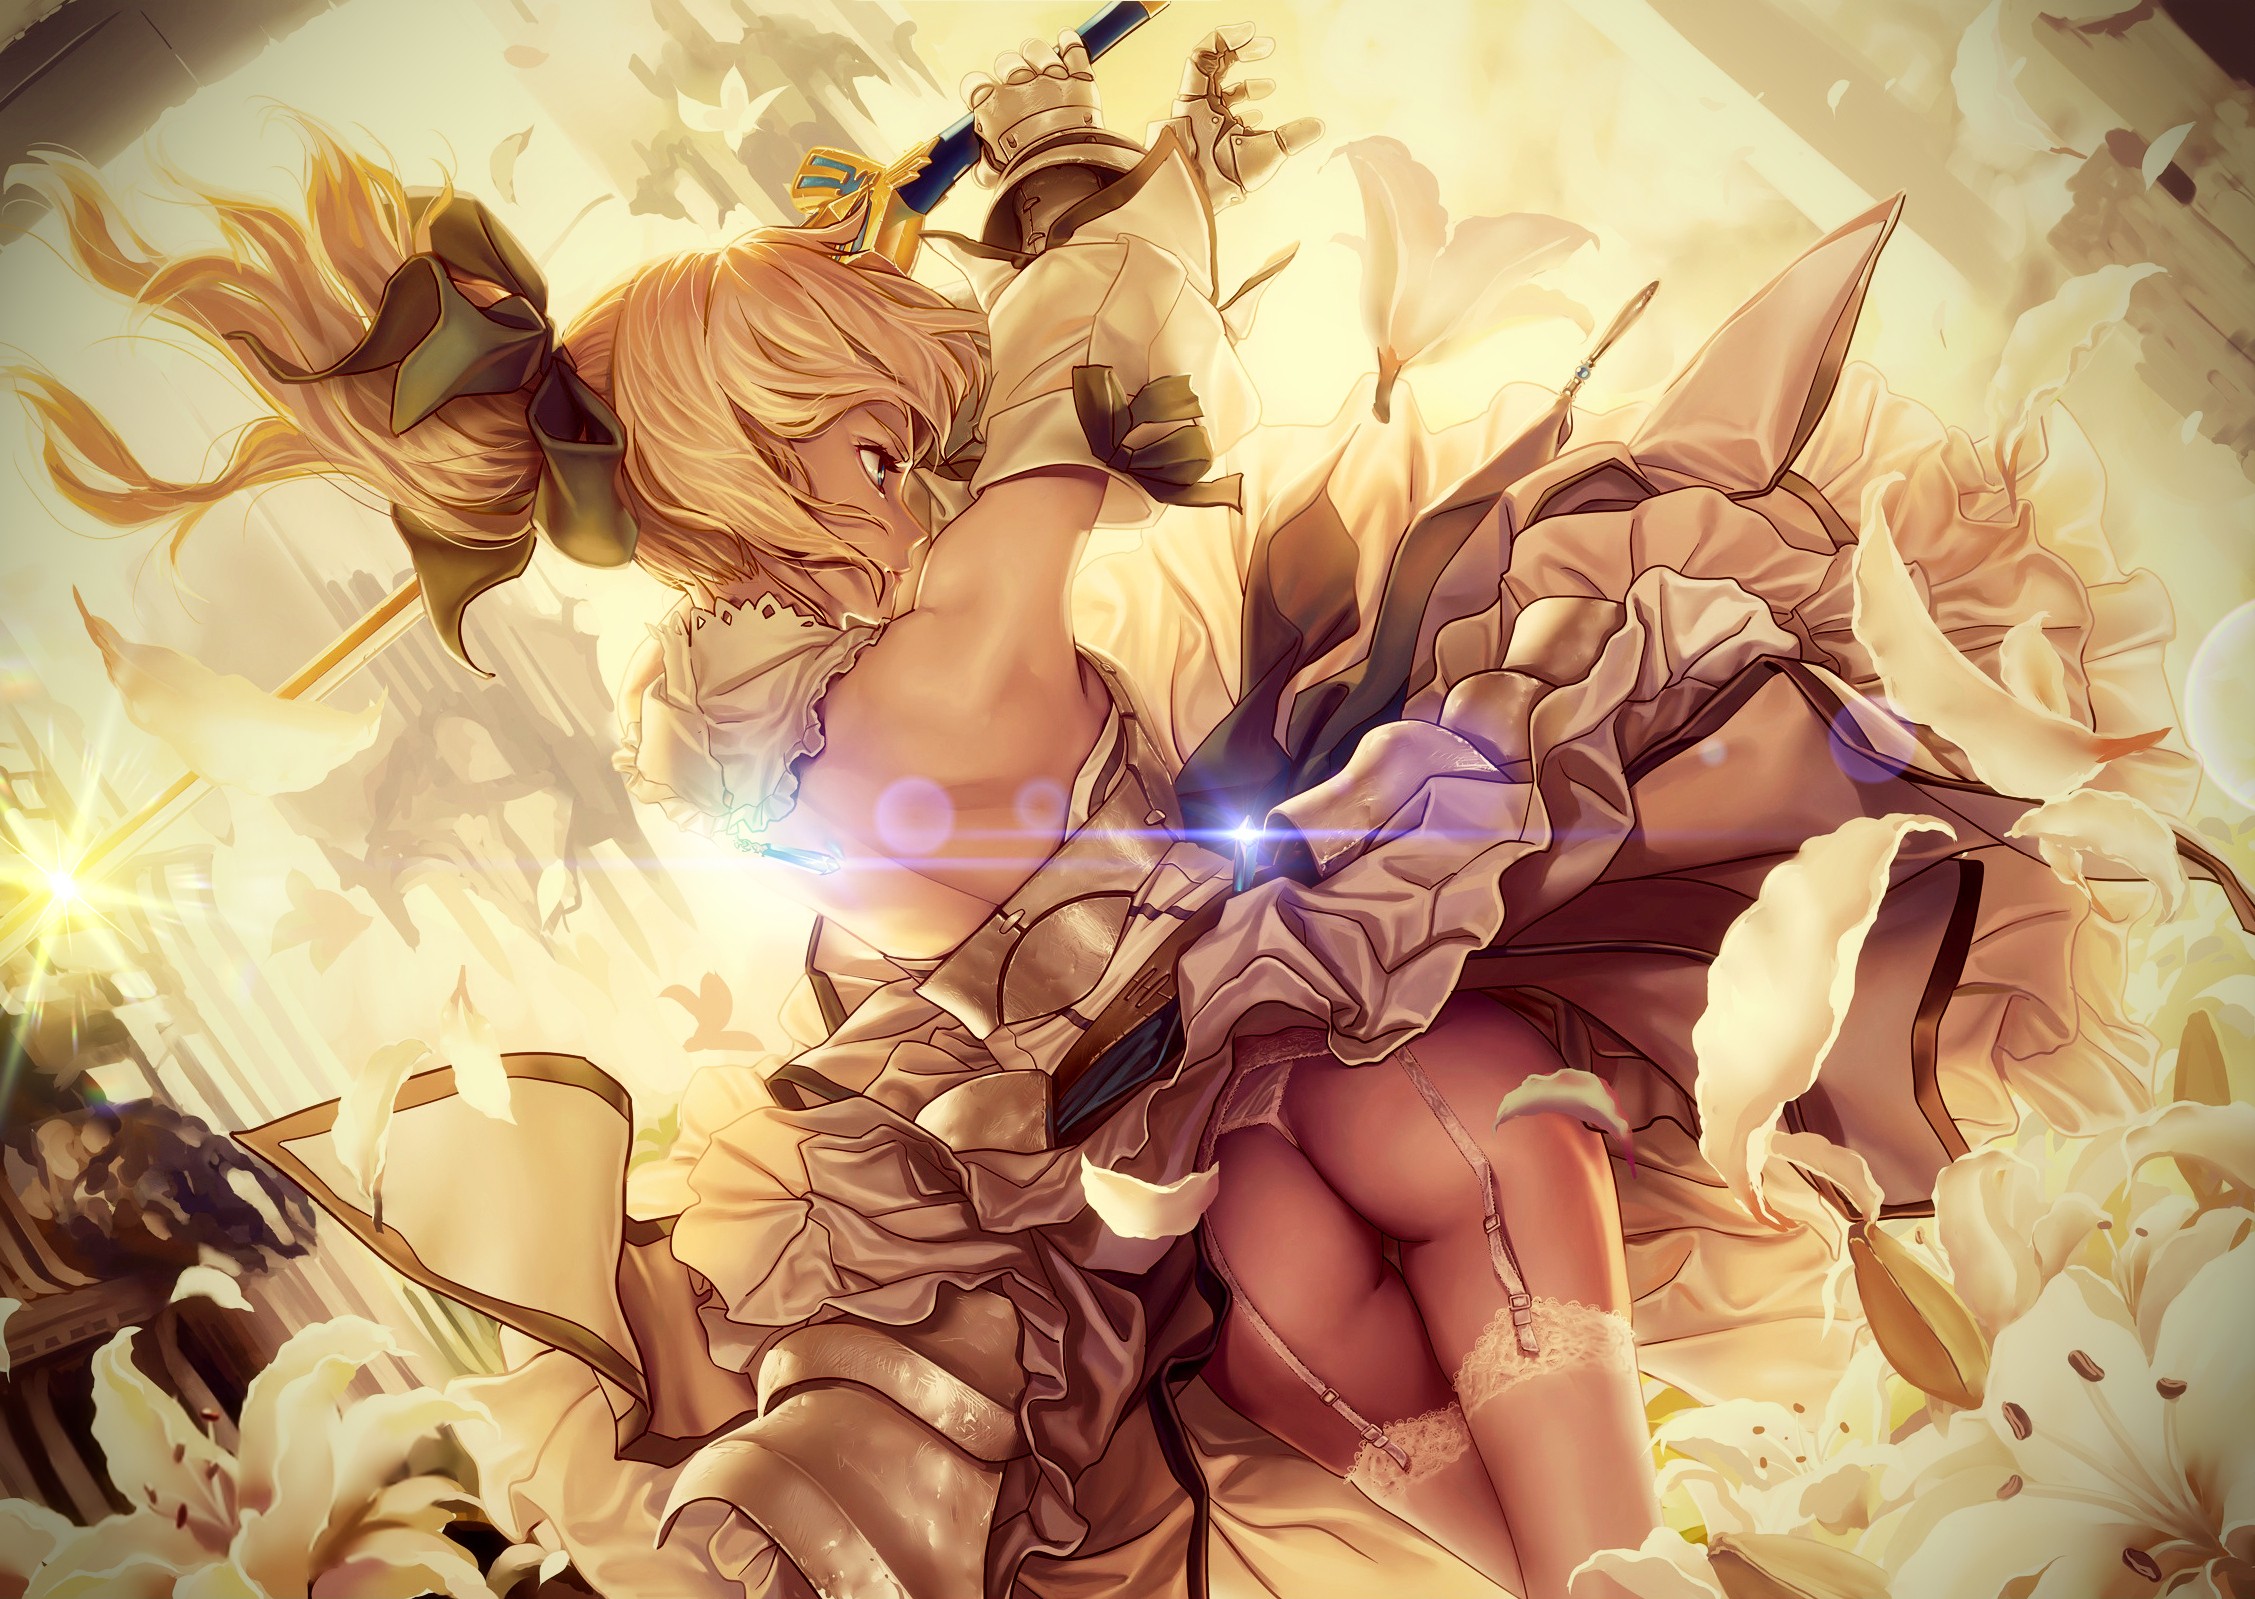 Anime 2255x1599 anime girls anime ass lingerie stockings blonde Fate series Saber Lily Artoria Pendragon Geister rear view fantasy art fantasy girl women with swords long hair